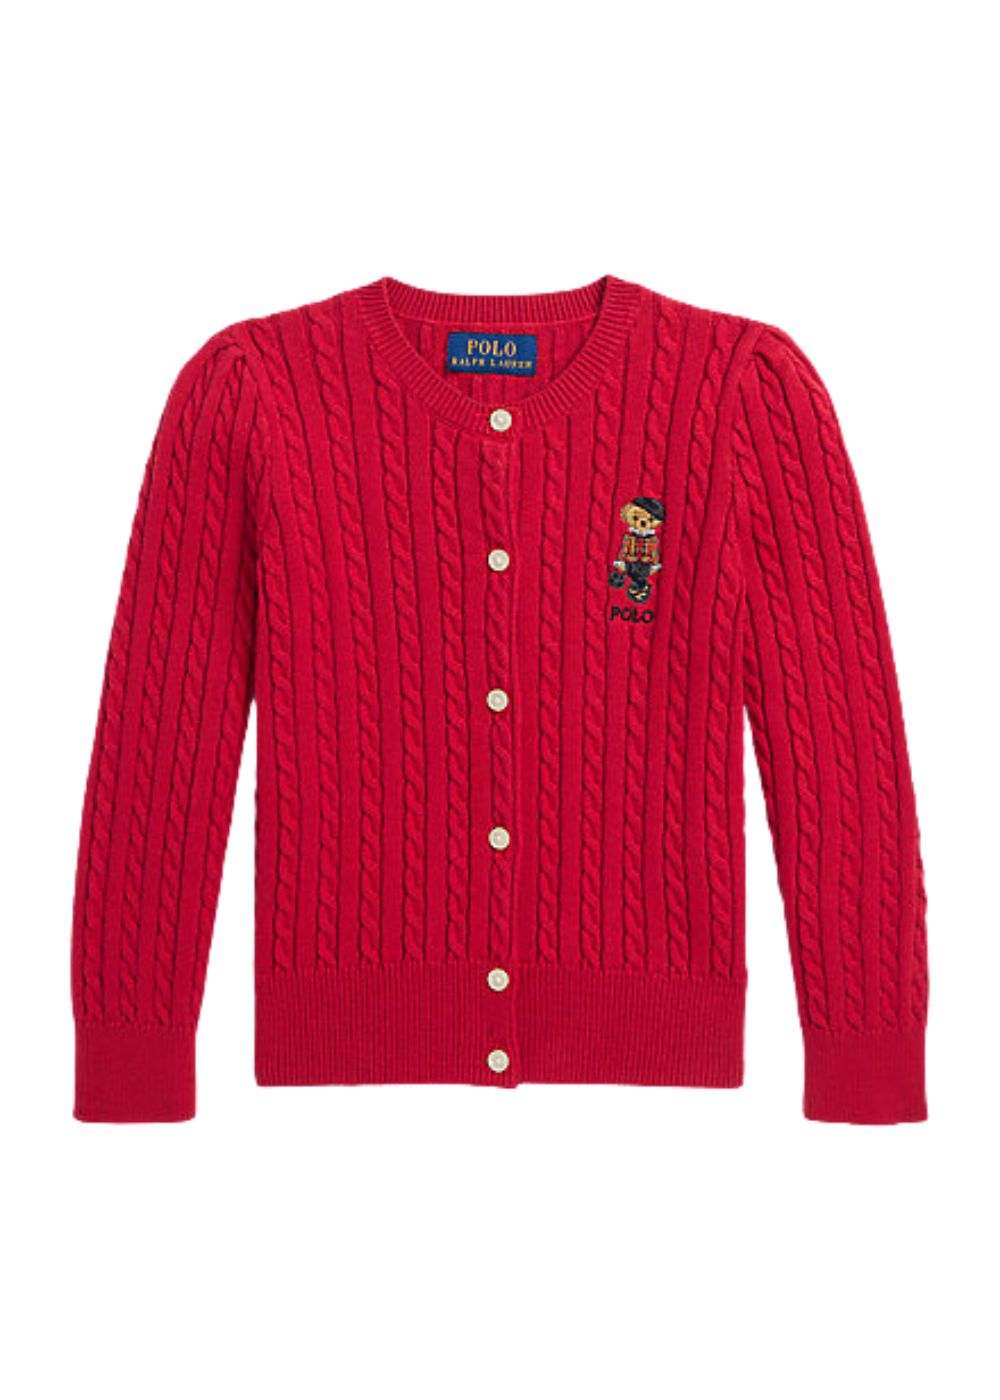 Featured image for “Polo Ralph Lauren Cardigan Polo Bear”